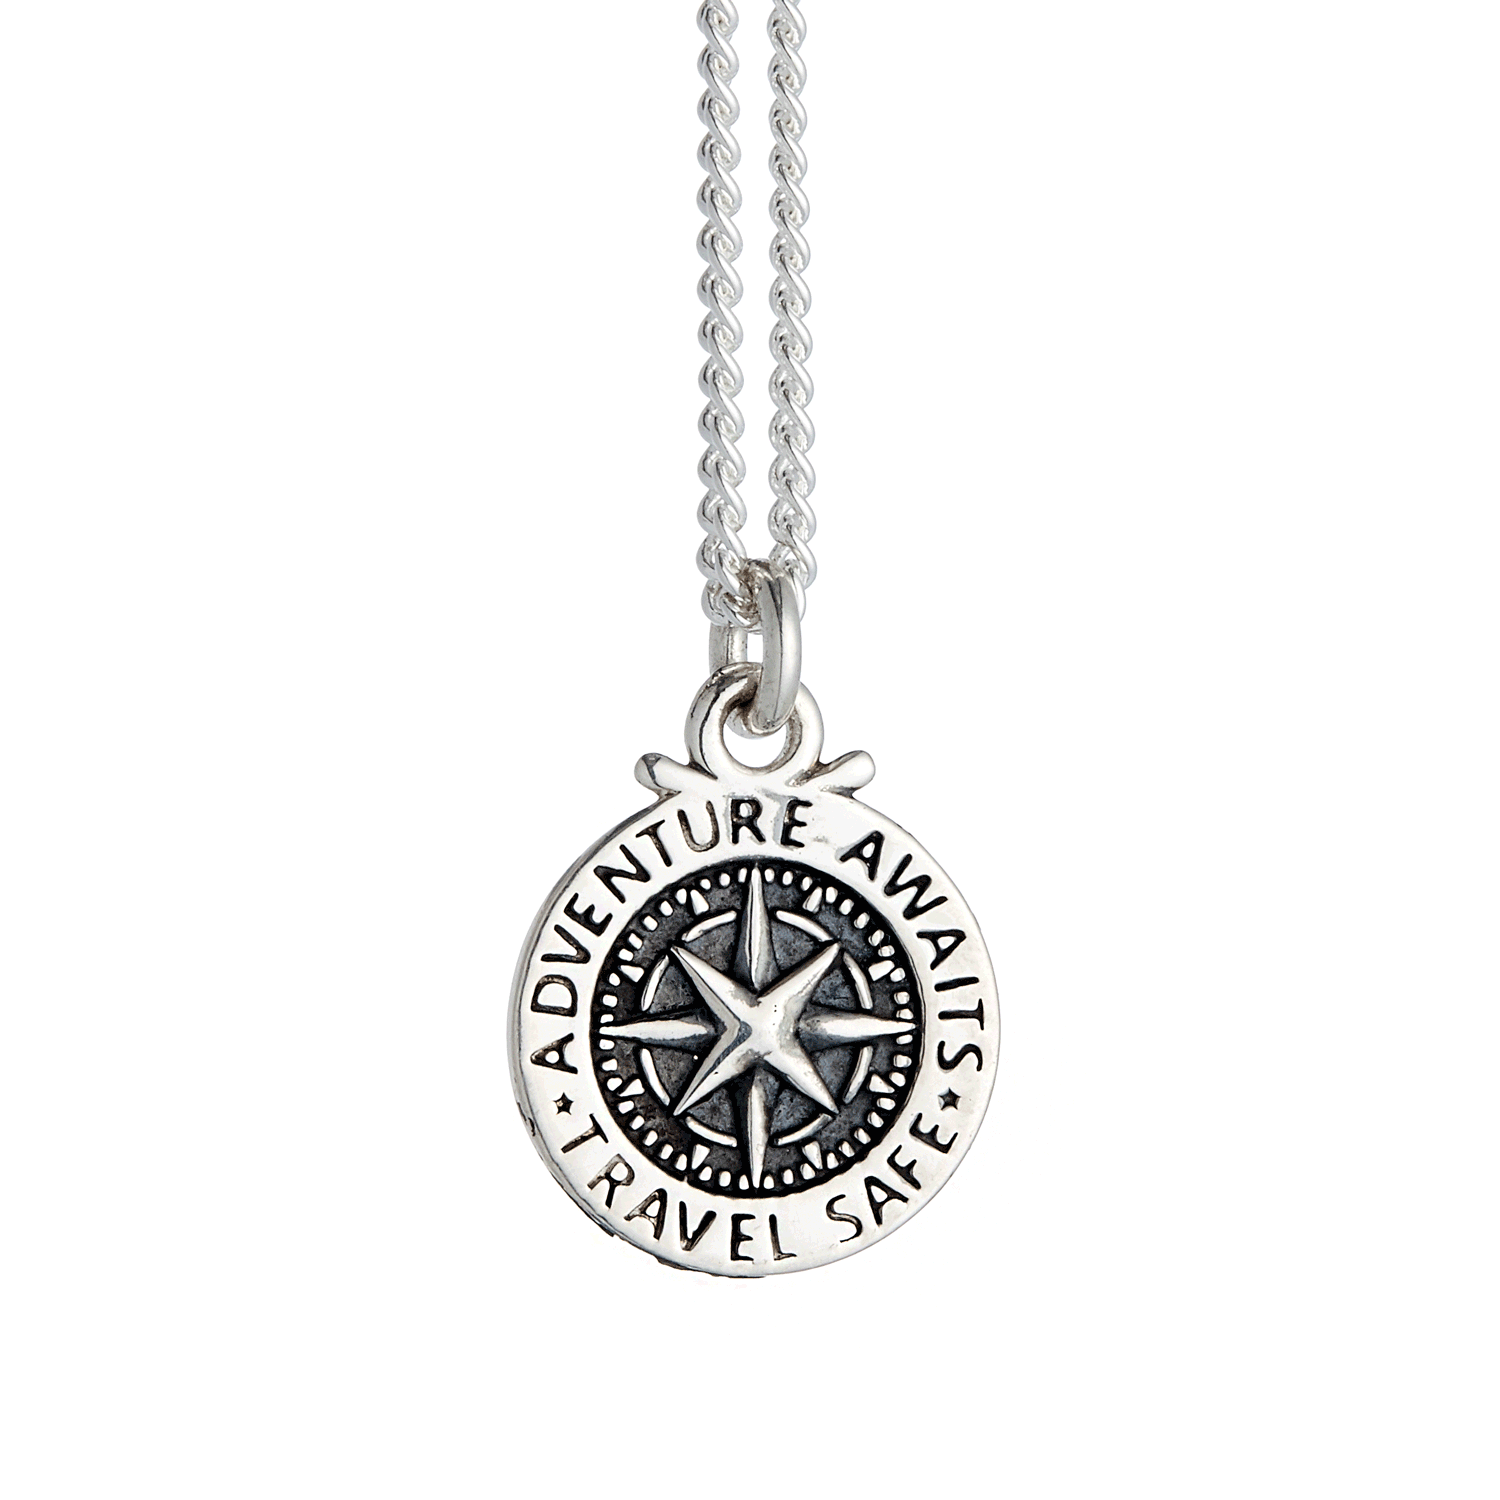 Travel Safe Compass St Christopher Small Silver Necklace